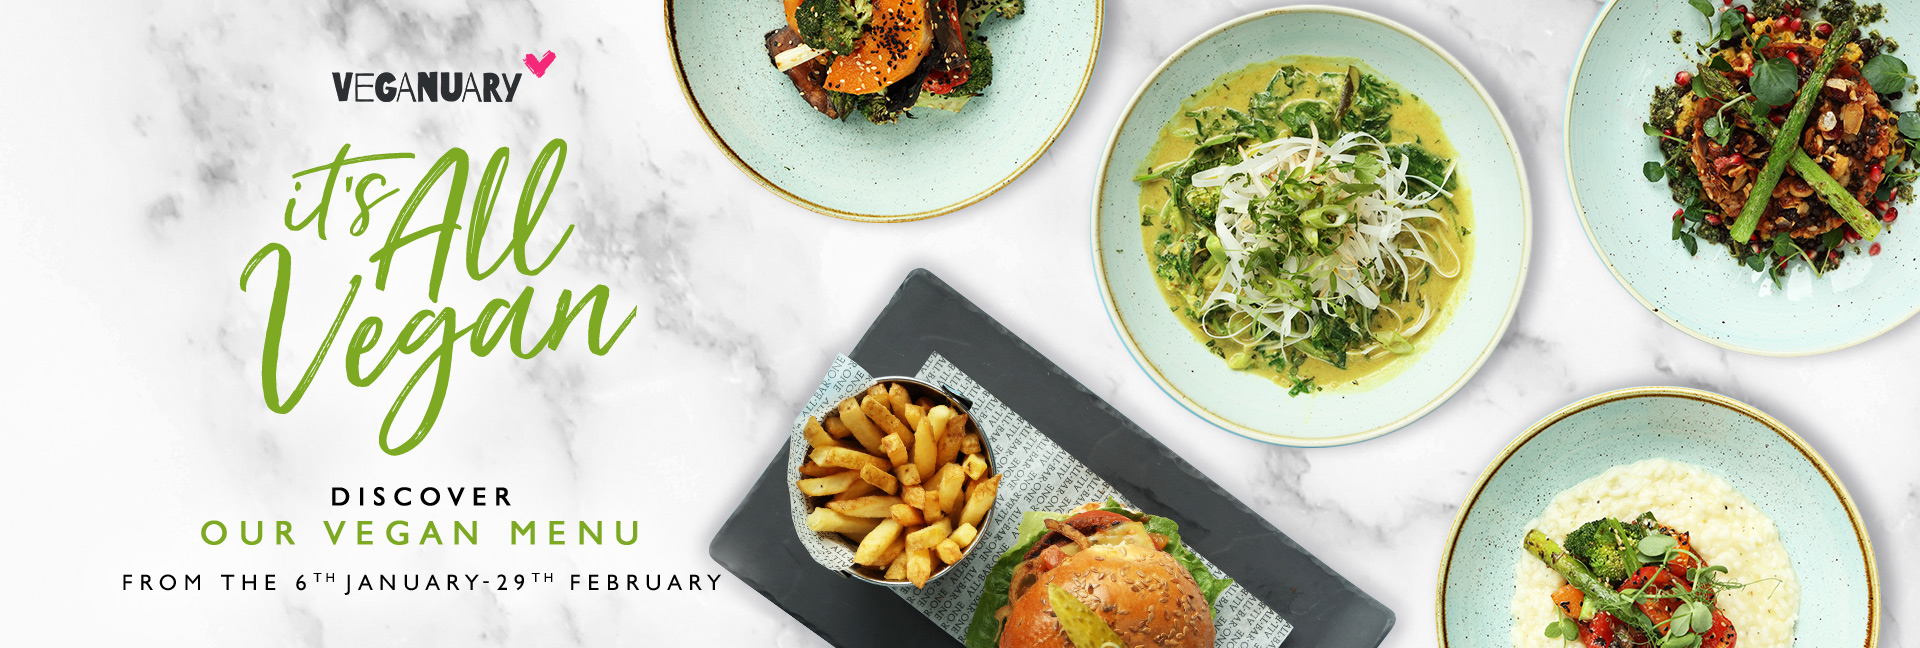 Veganuary Menu at All Bar One Picton Place